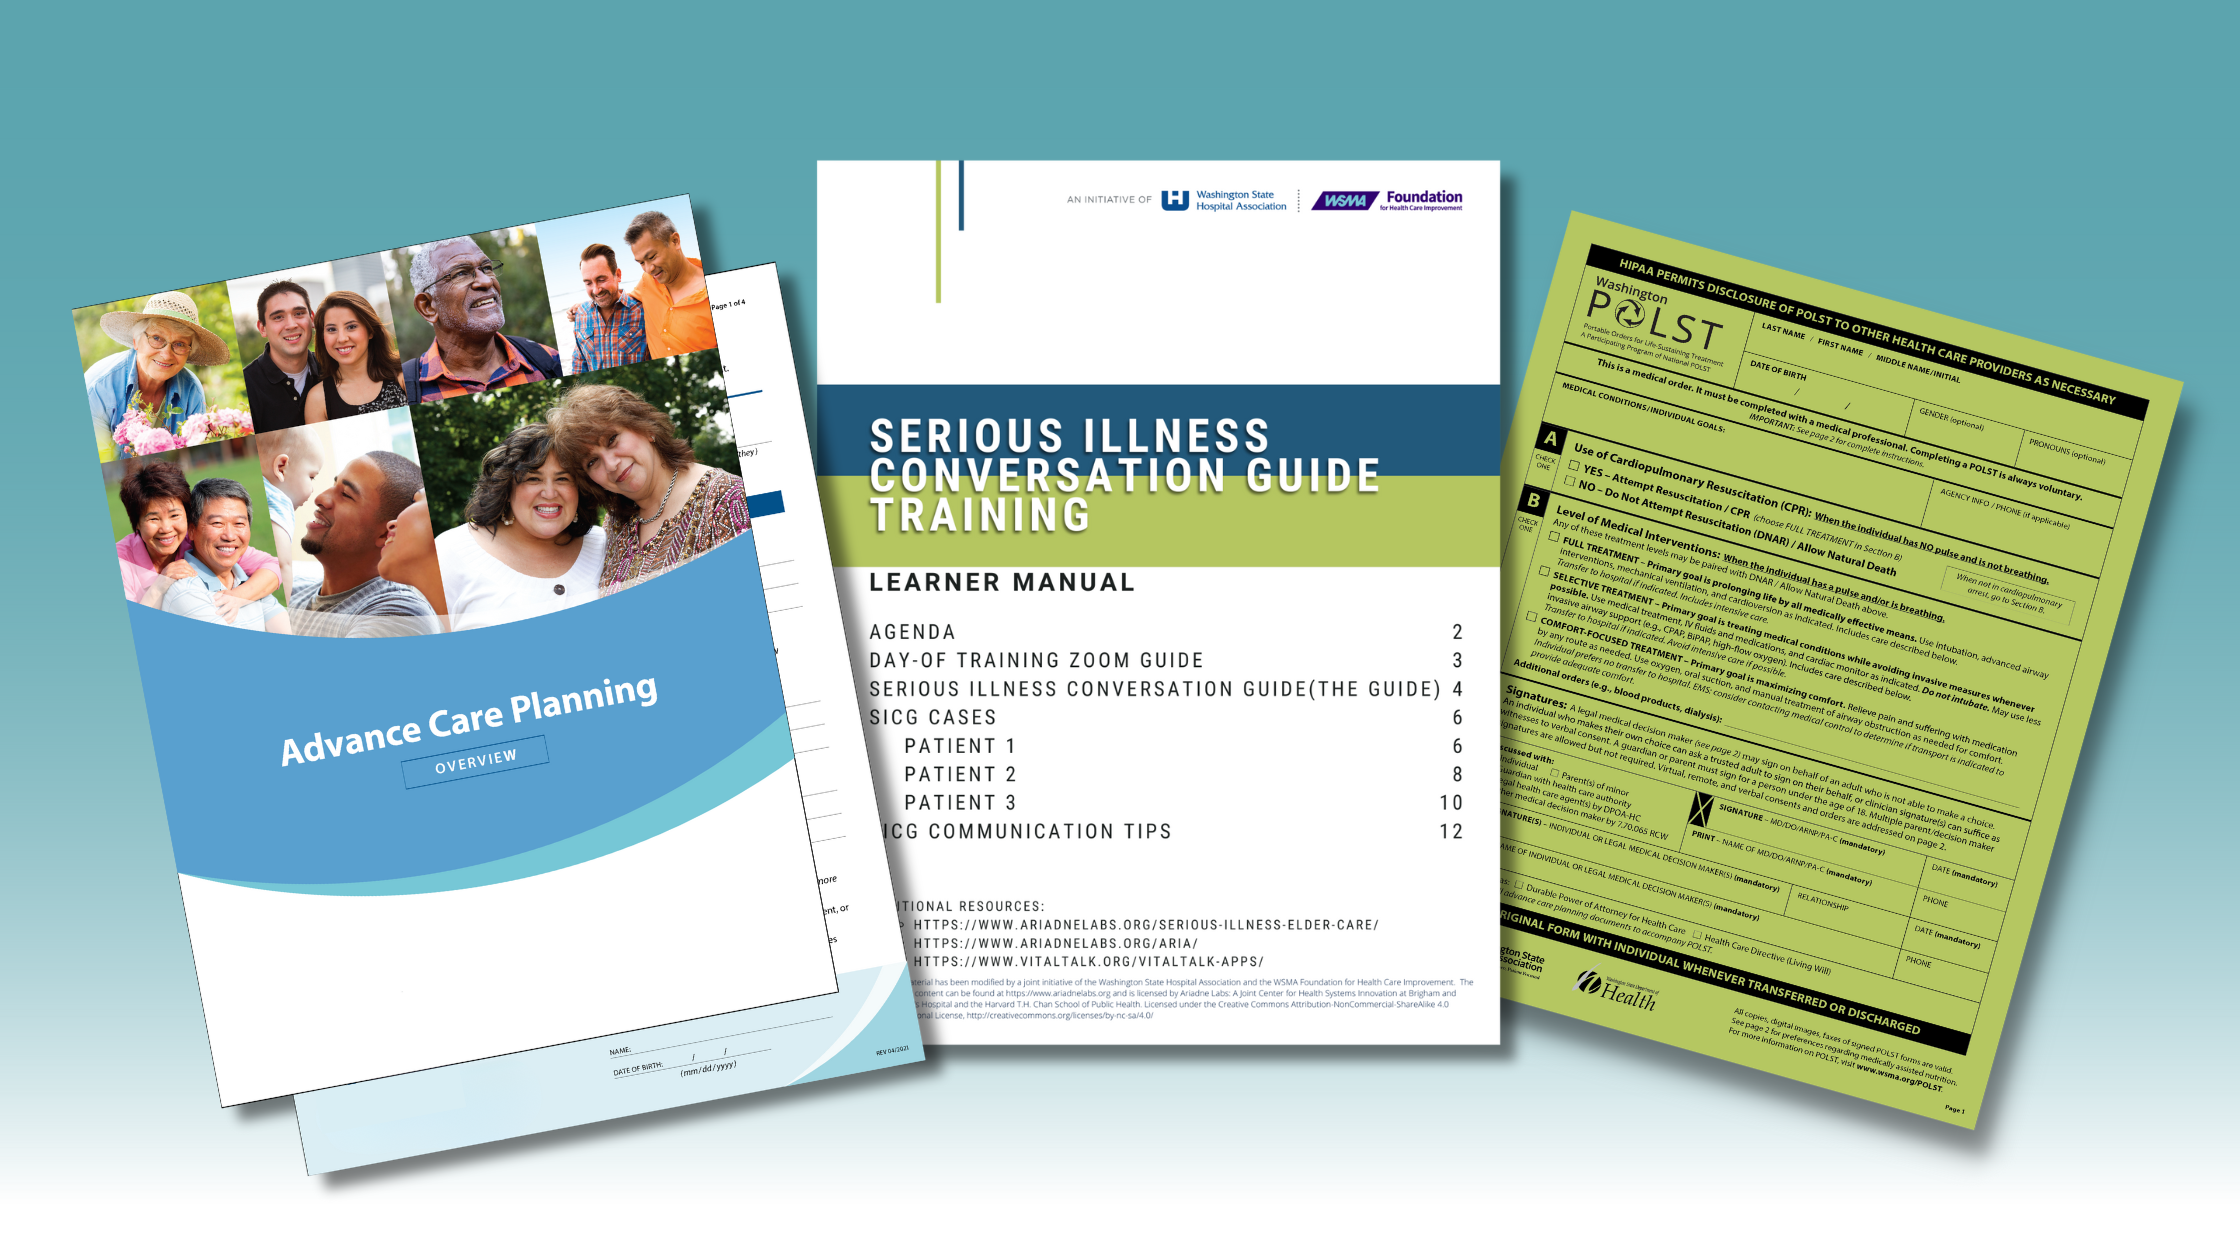 Advance Care Planning & Serious Illness Resources